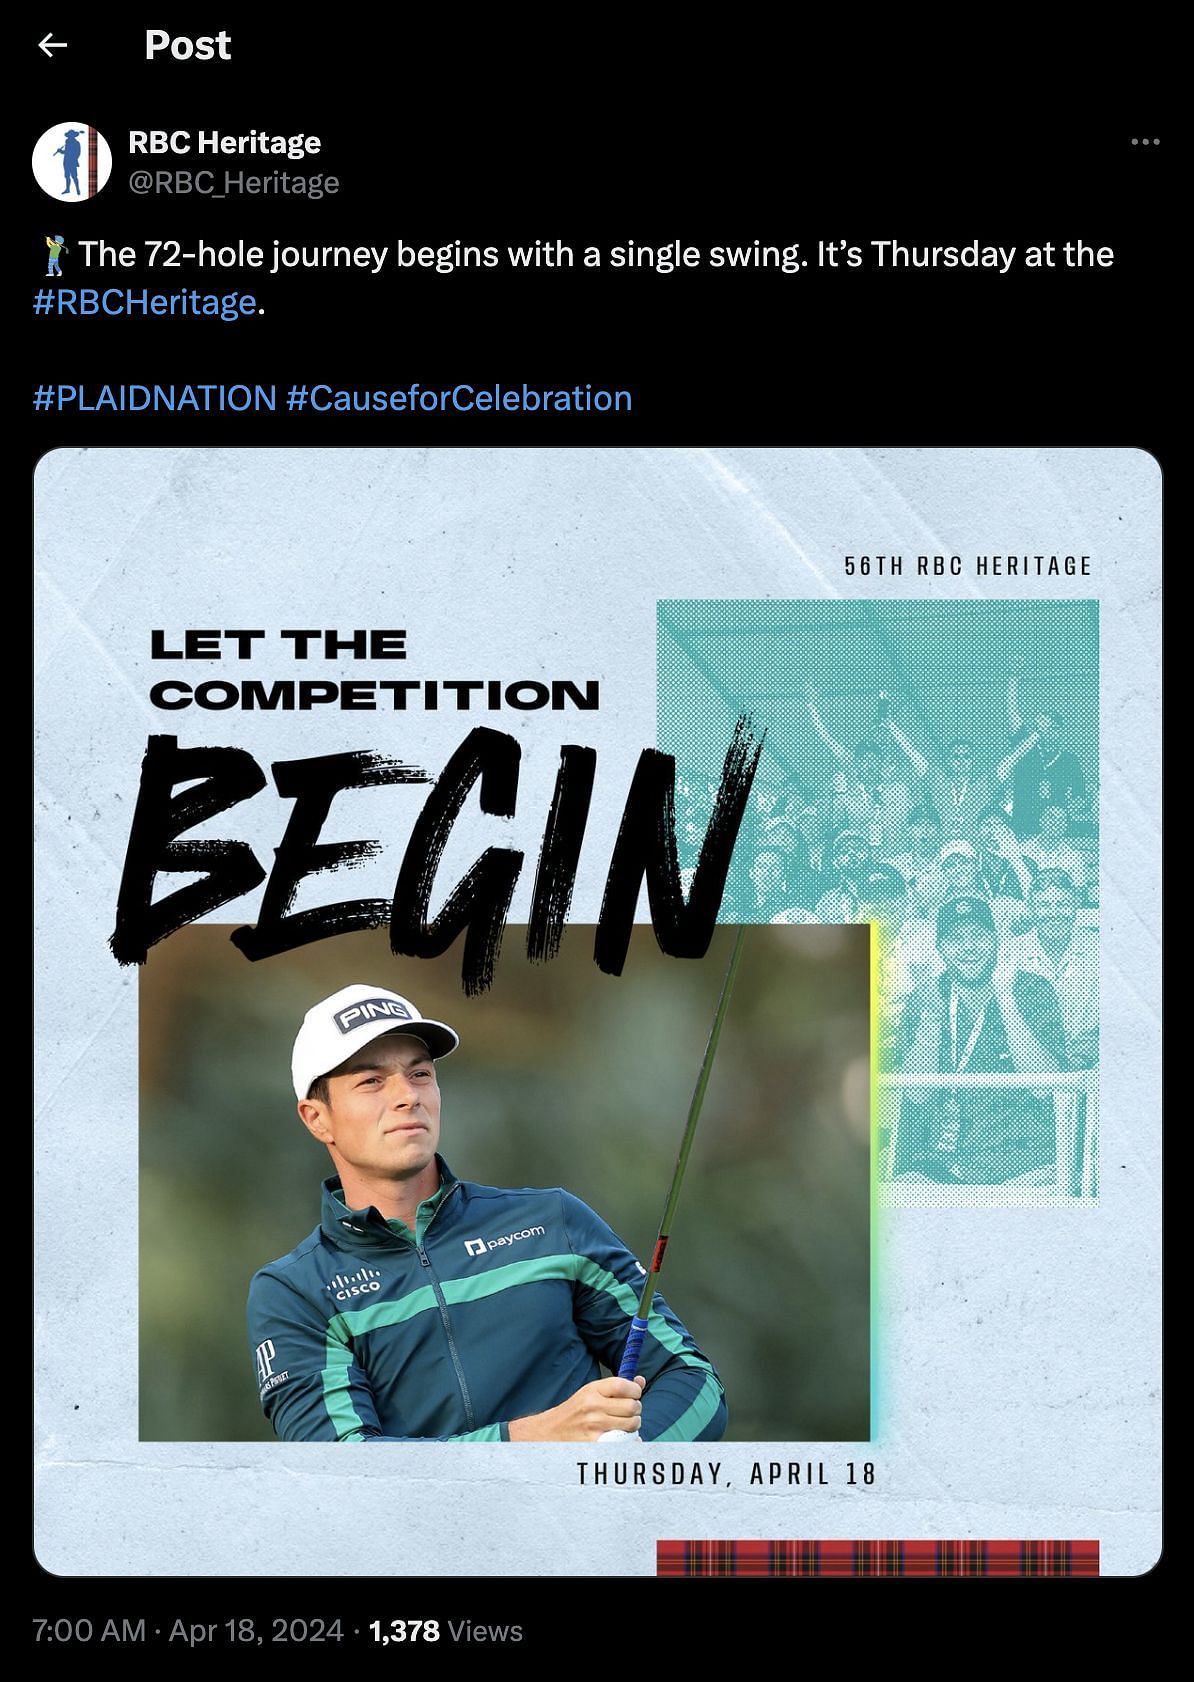 The RBC Heritage posted about Viktor Hovland